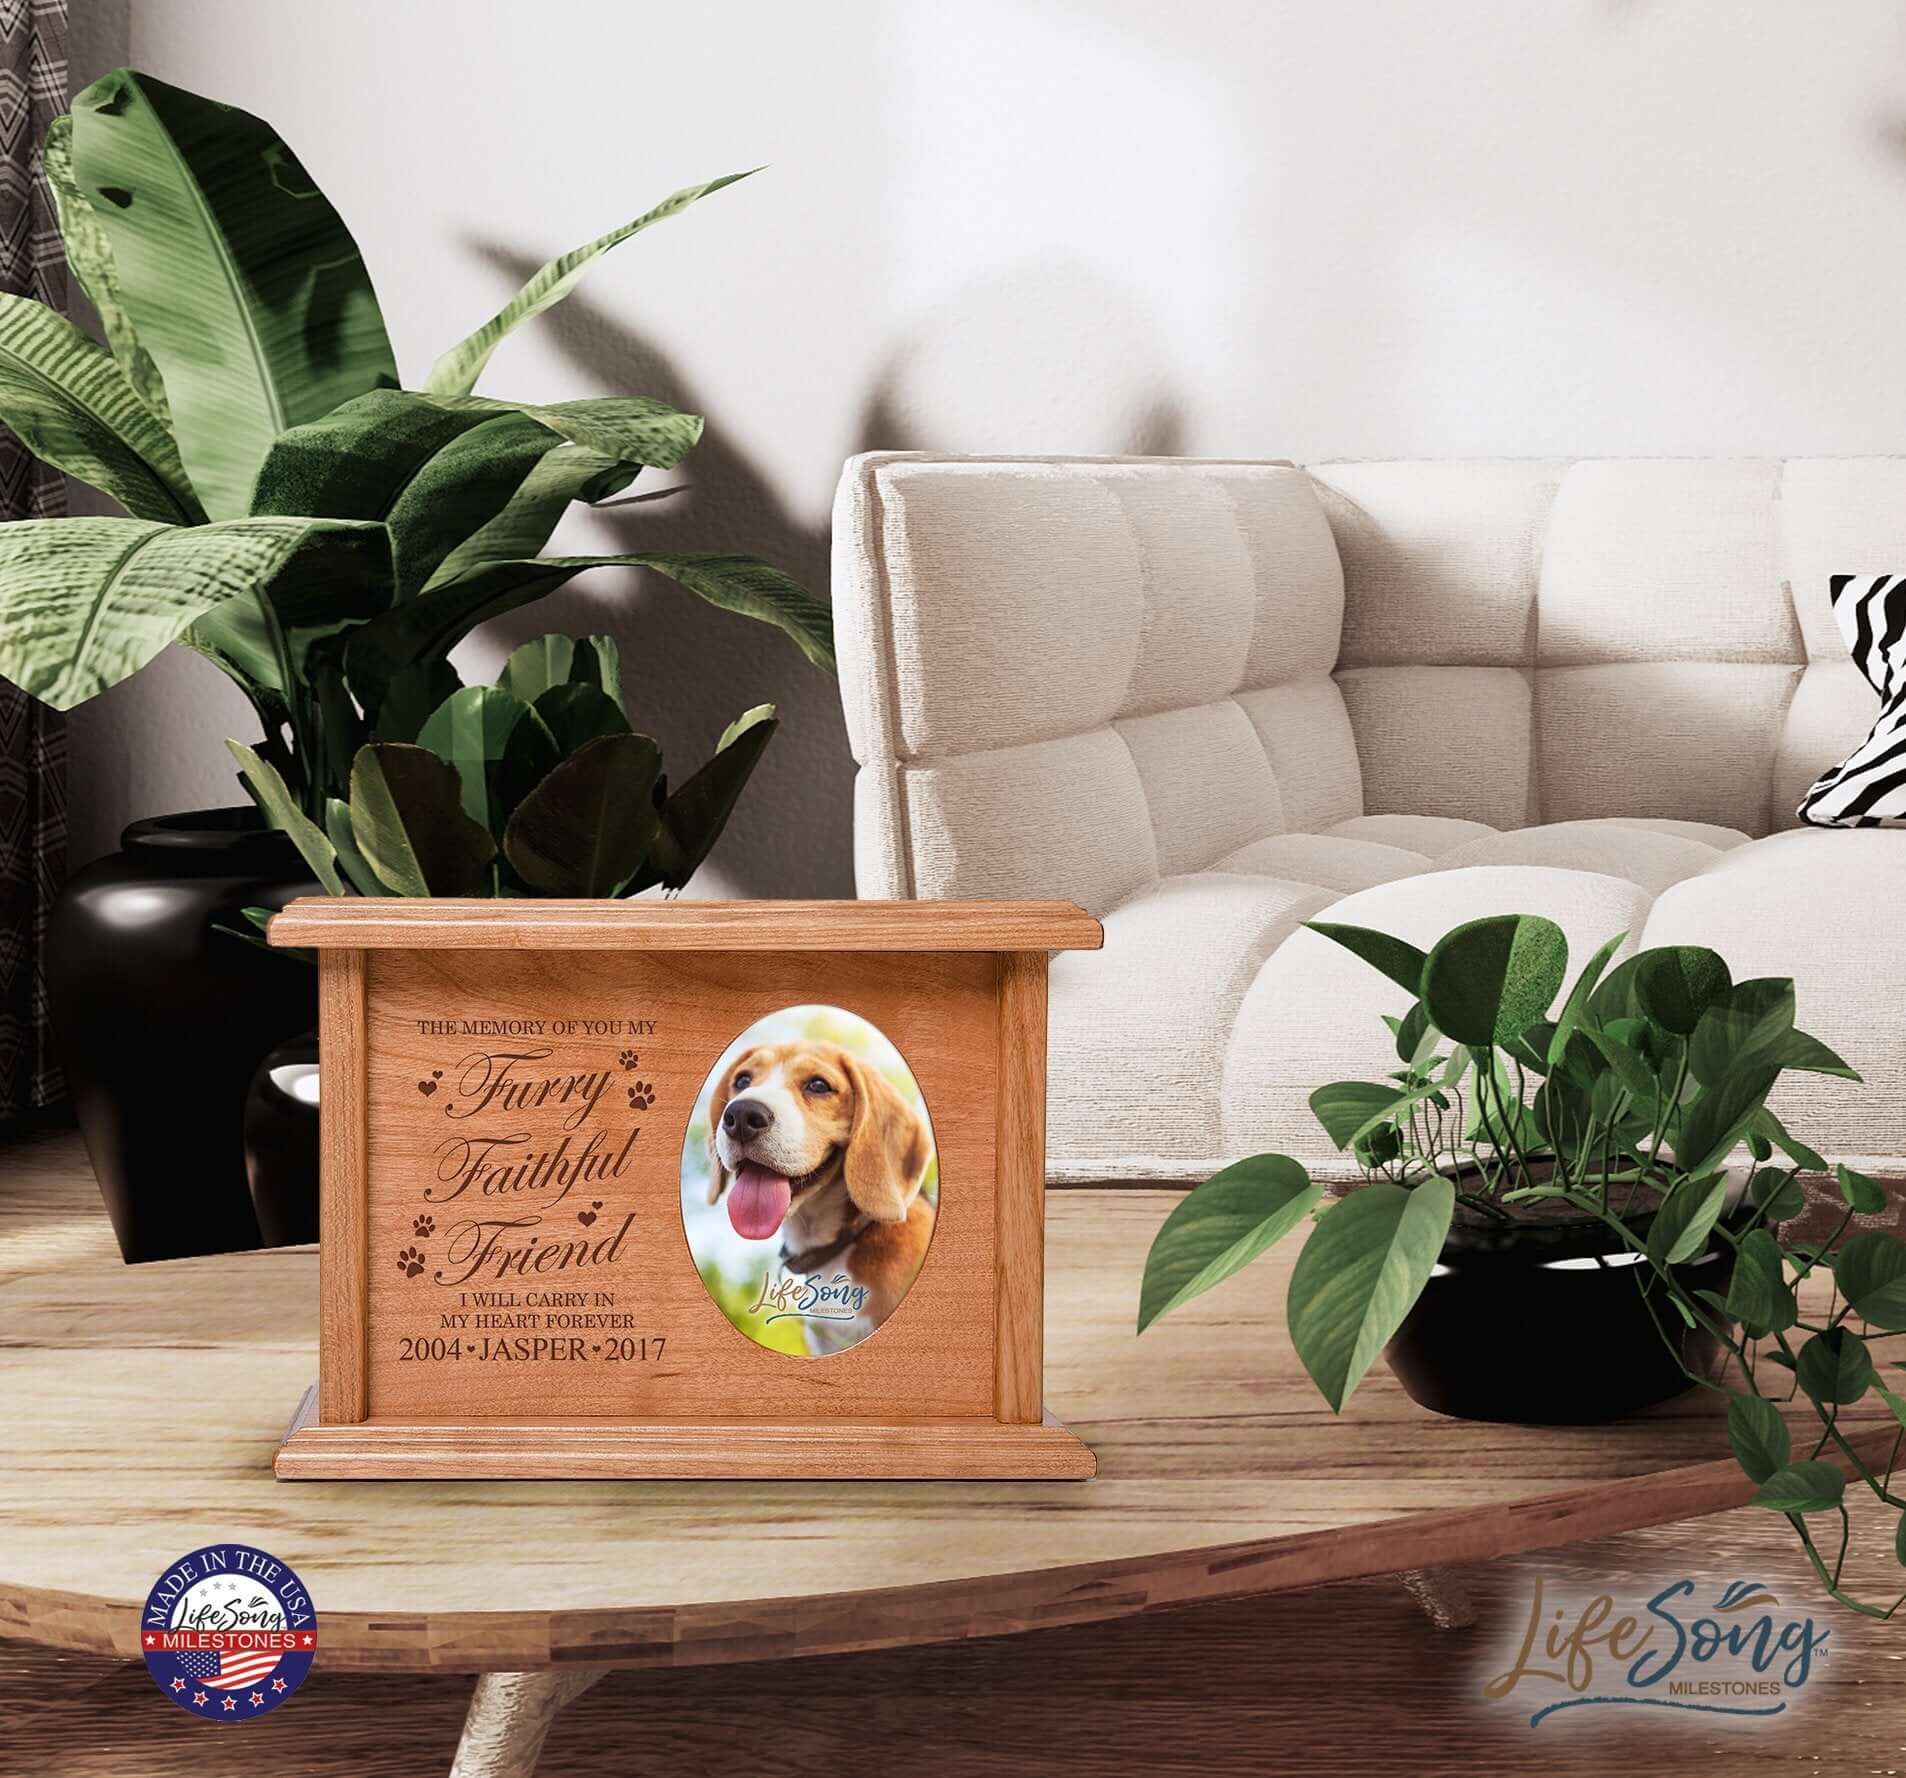 Cherry Pet Memorial 2x3 Picture Urn with phrase "The Memory of You"